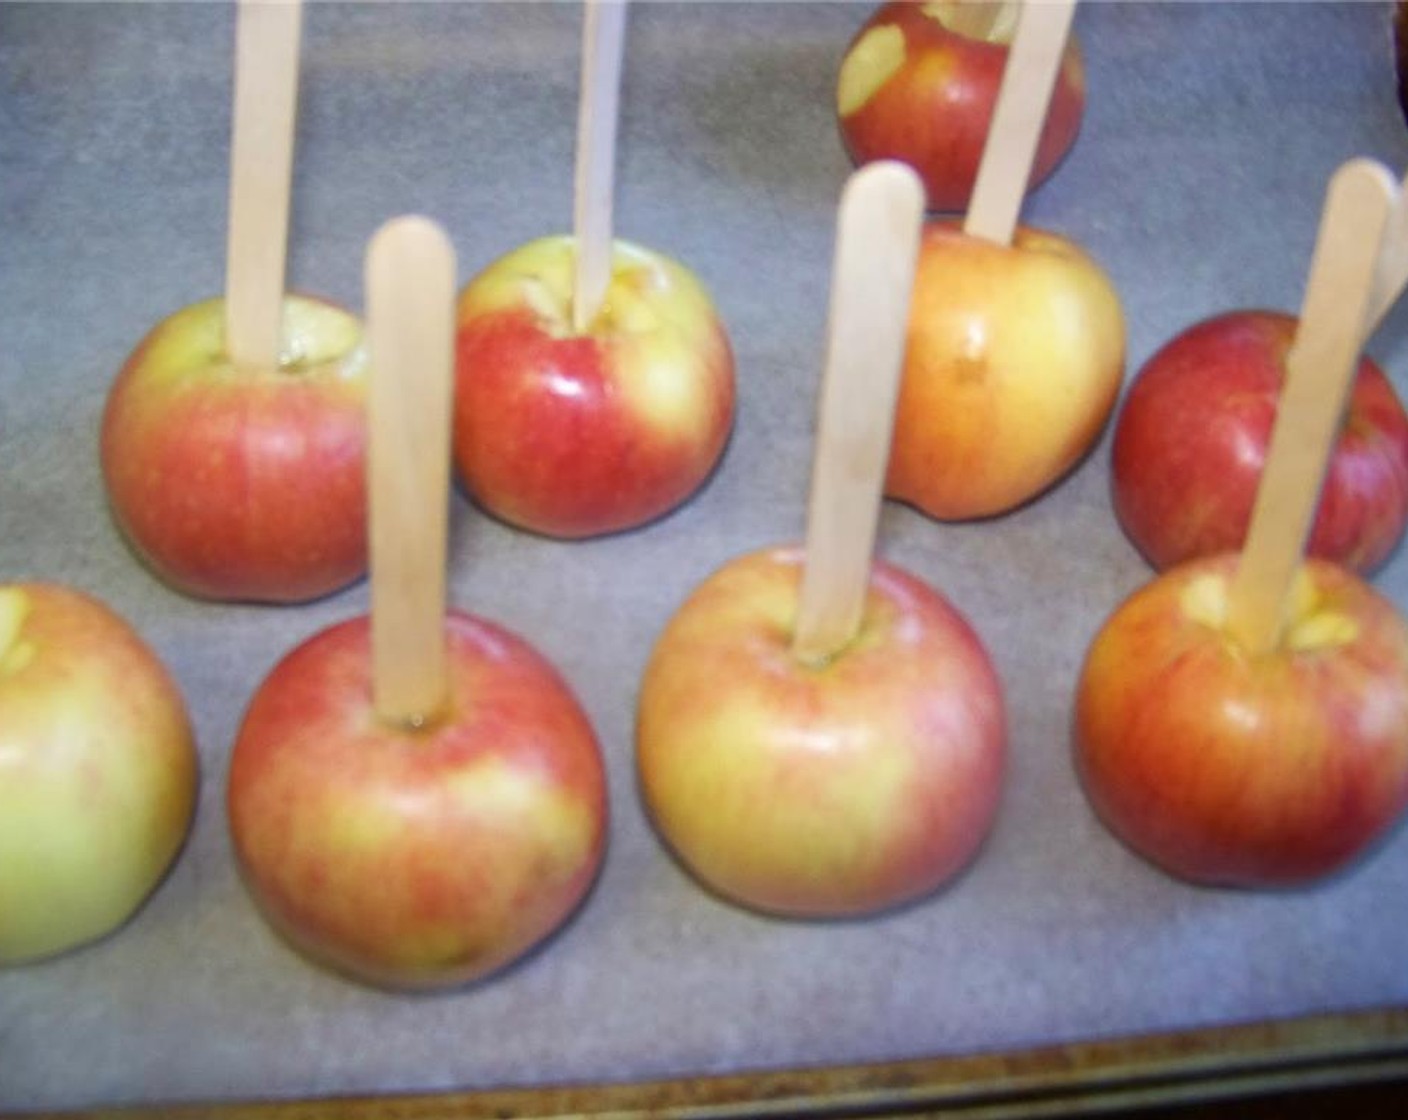 step 2 Wash and remove the stems from the Apples (6). Insert popsicle sticks into the apples and chill them until needed.